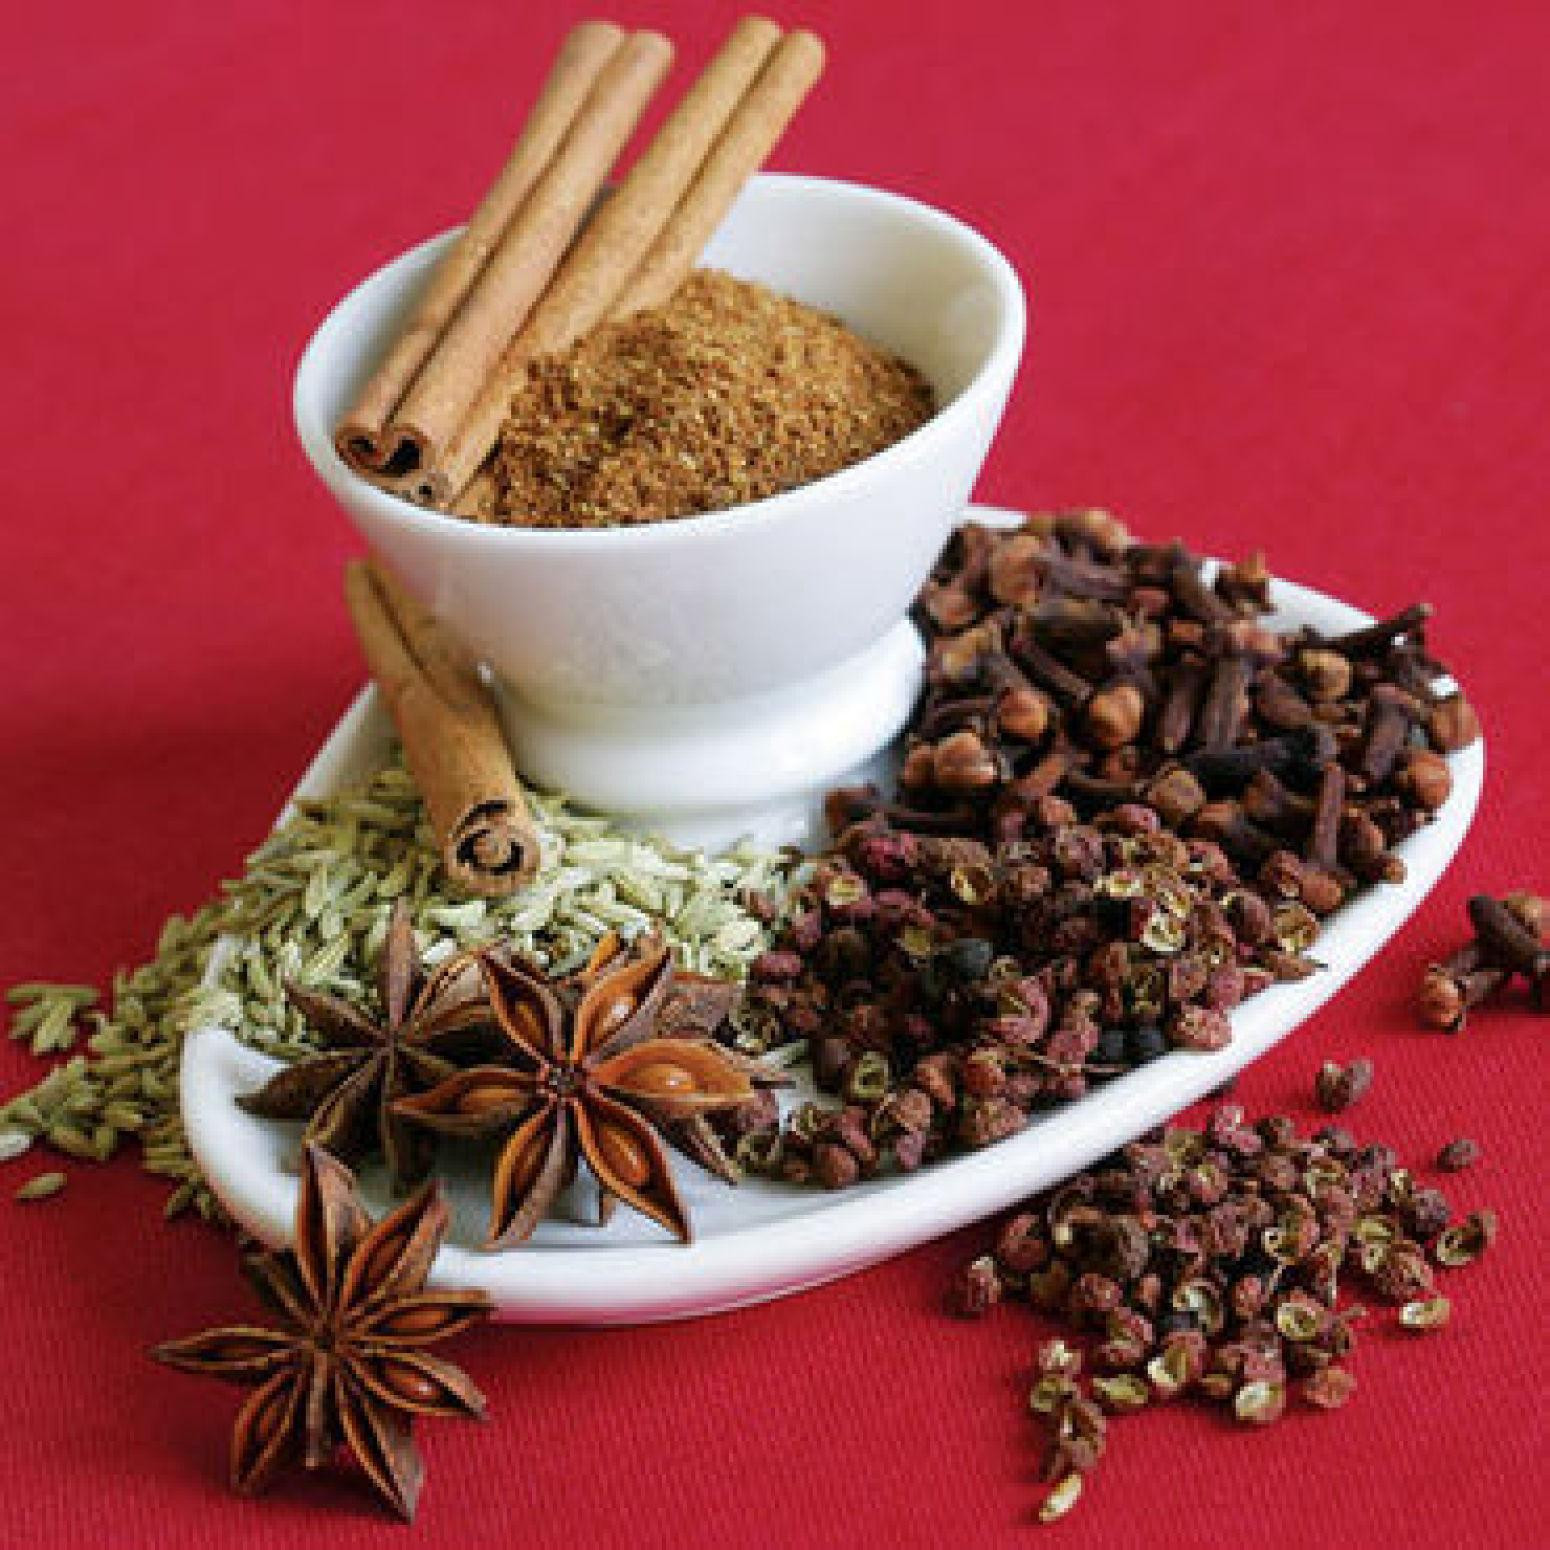 Chinese Five Spice Recipes
 Chinese 5 Spice Powder Recipe